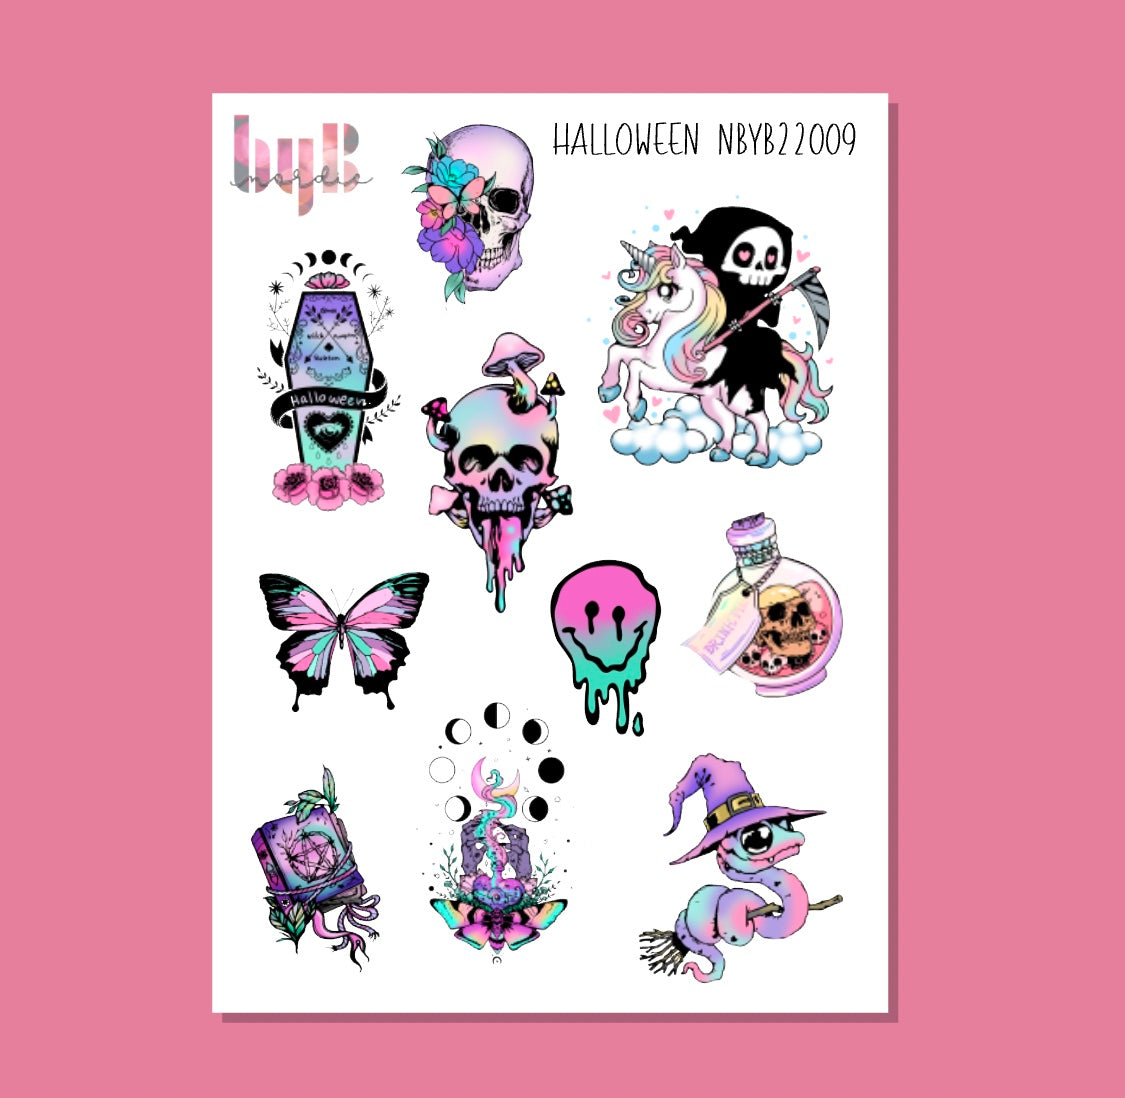 HALLOWEEN Stickers - purple and pink - 12,5 x 17 cm - For BuJo, Decorating, Planning, Scrapbooking